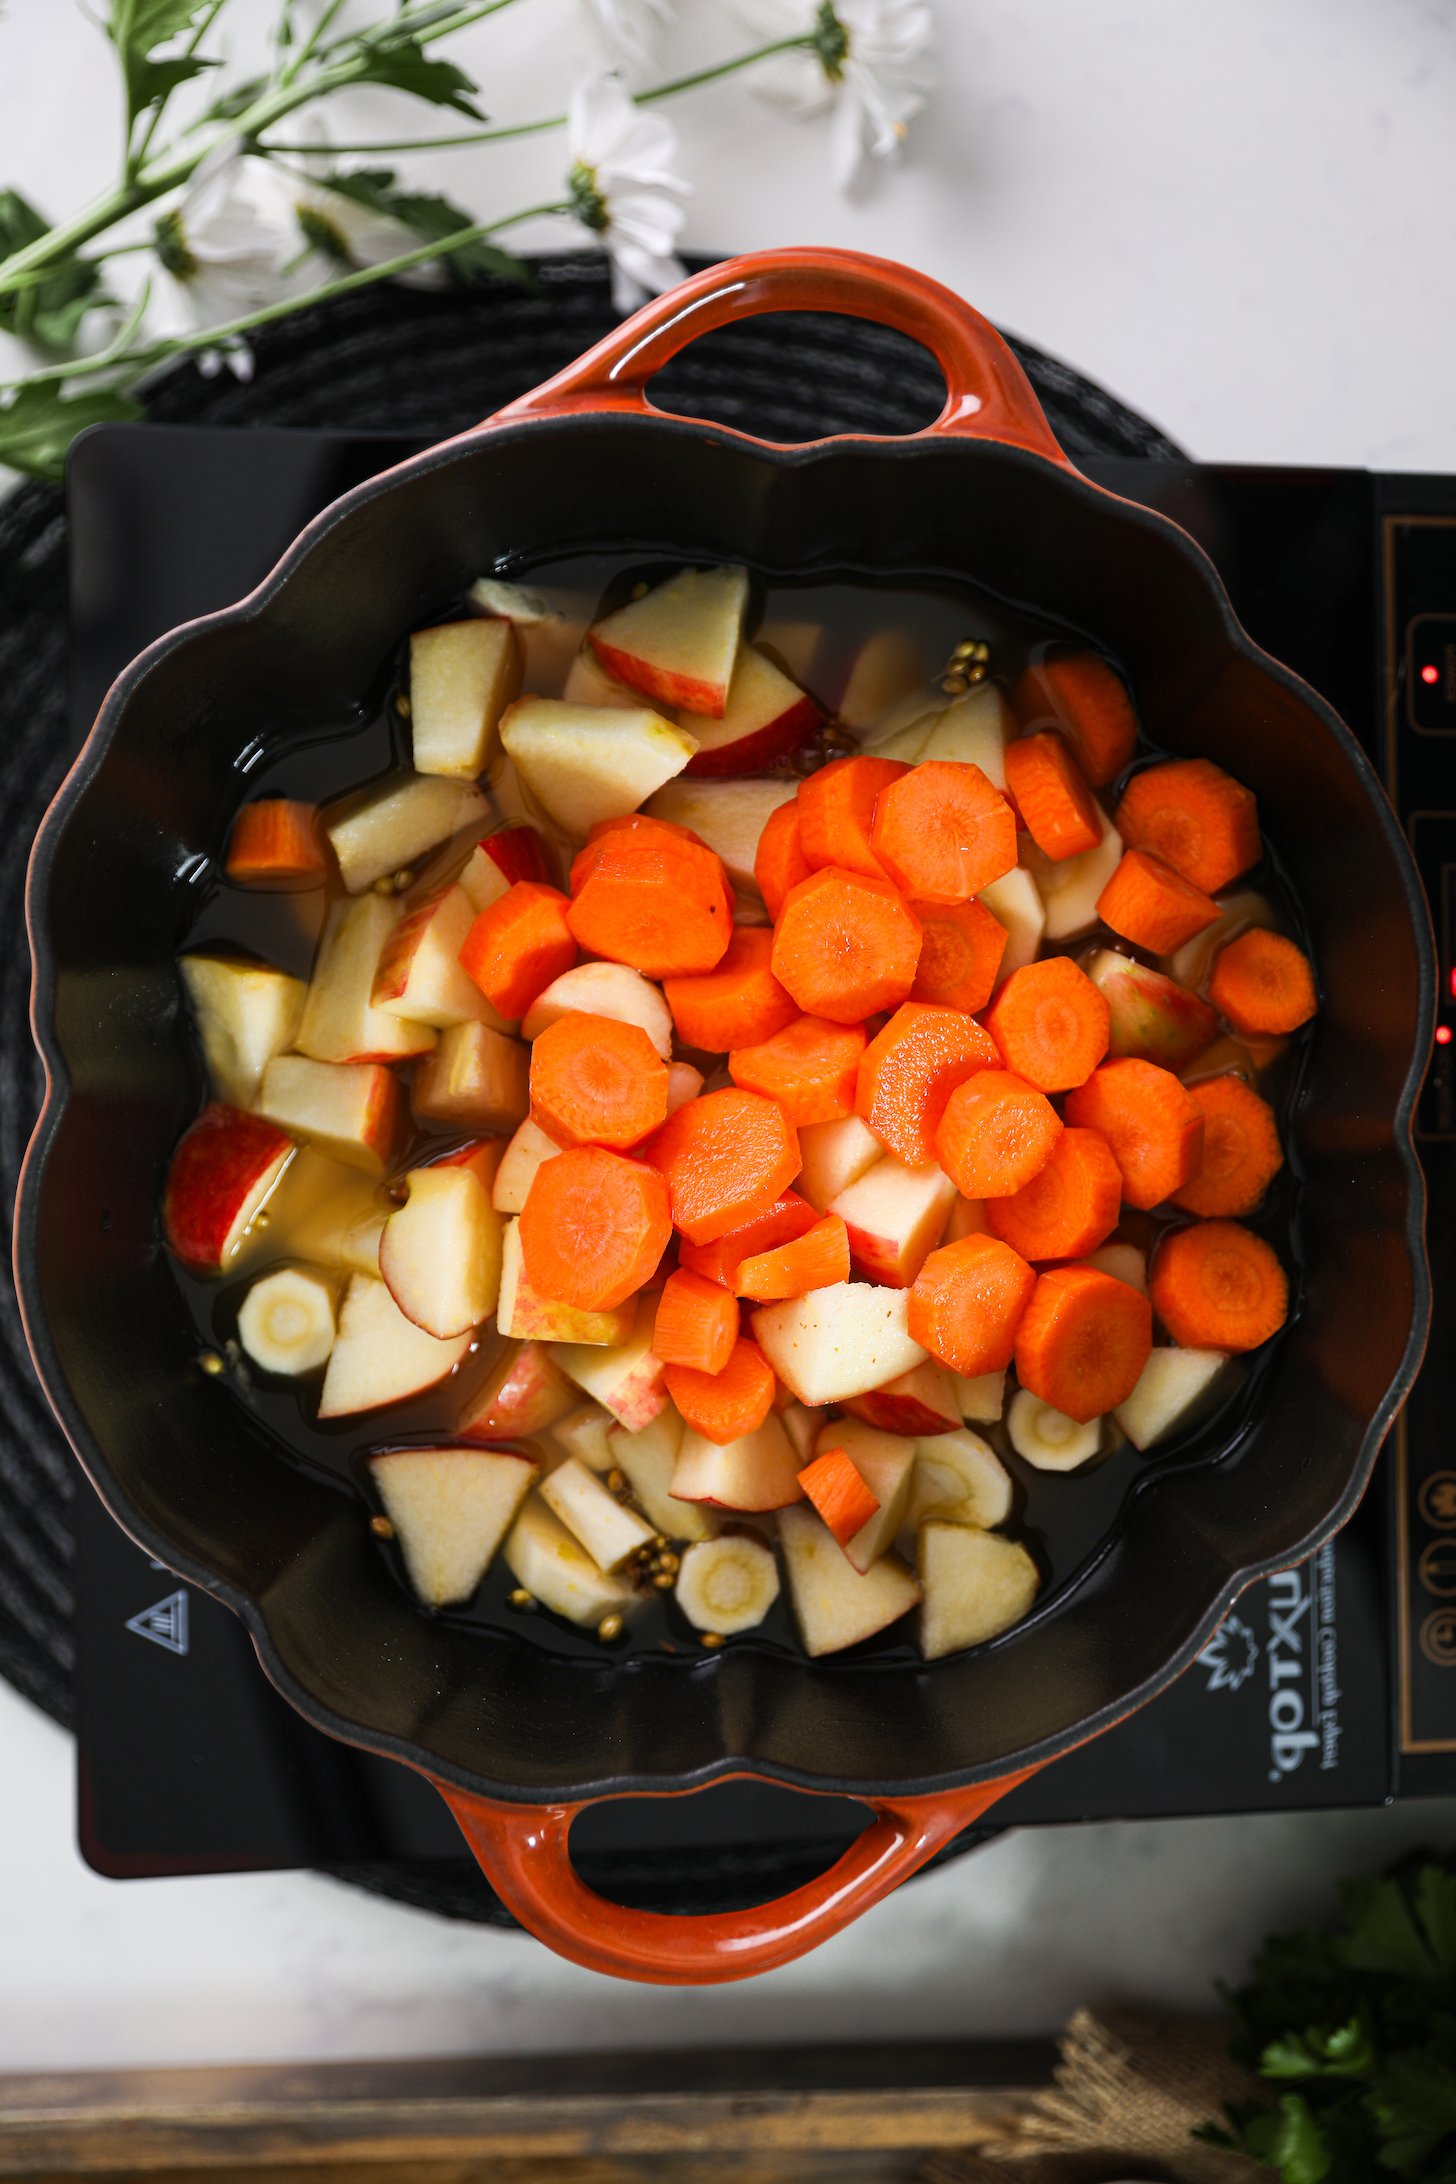 Overhead view of diced carrots, apple, and parsnips in stock inside a cooking pot.